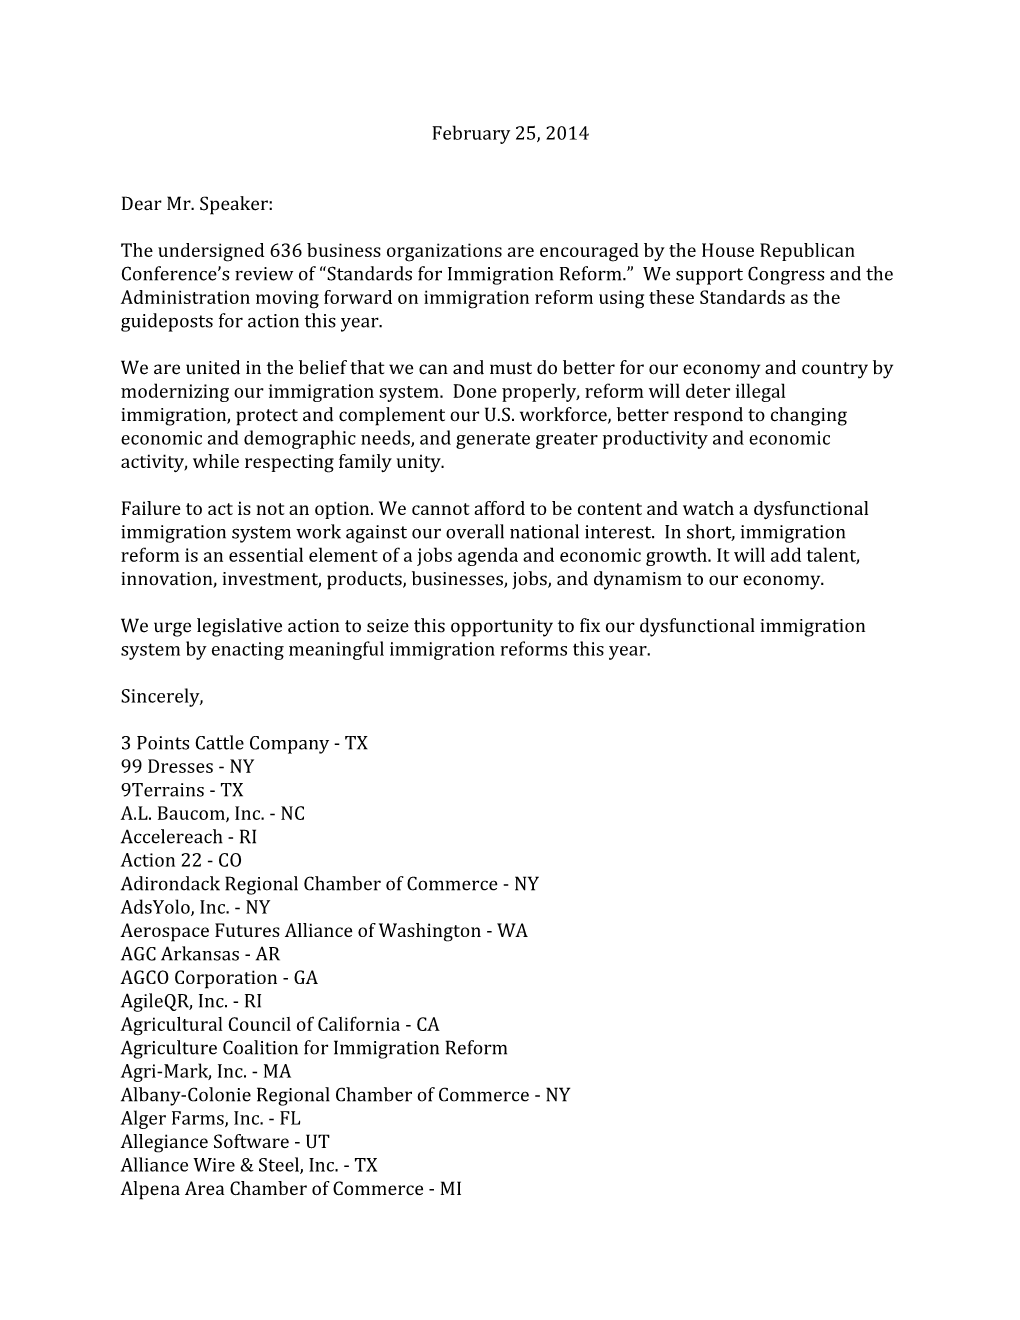 Multi-Industry Letter on Immigration Reform